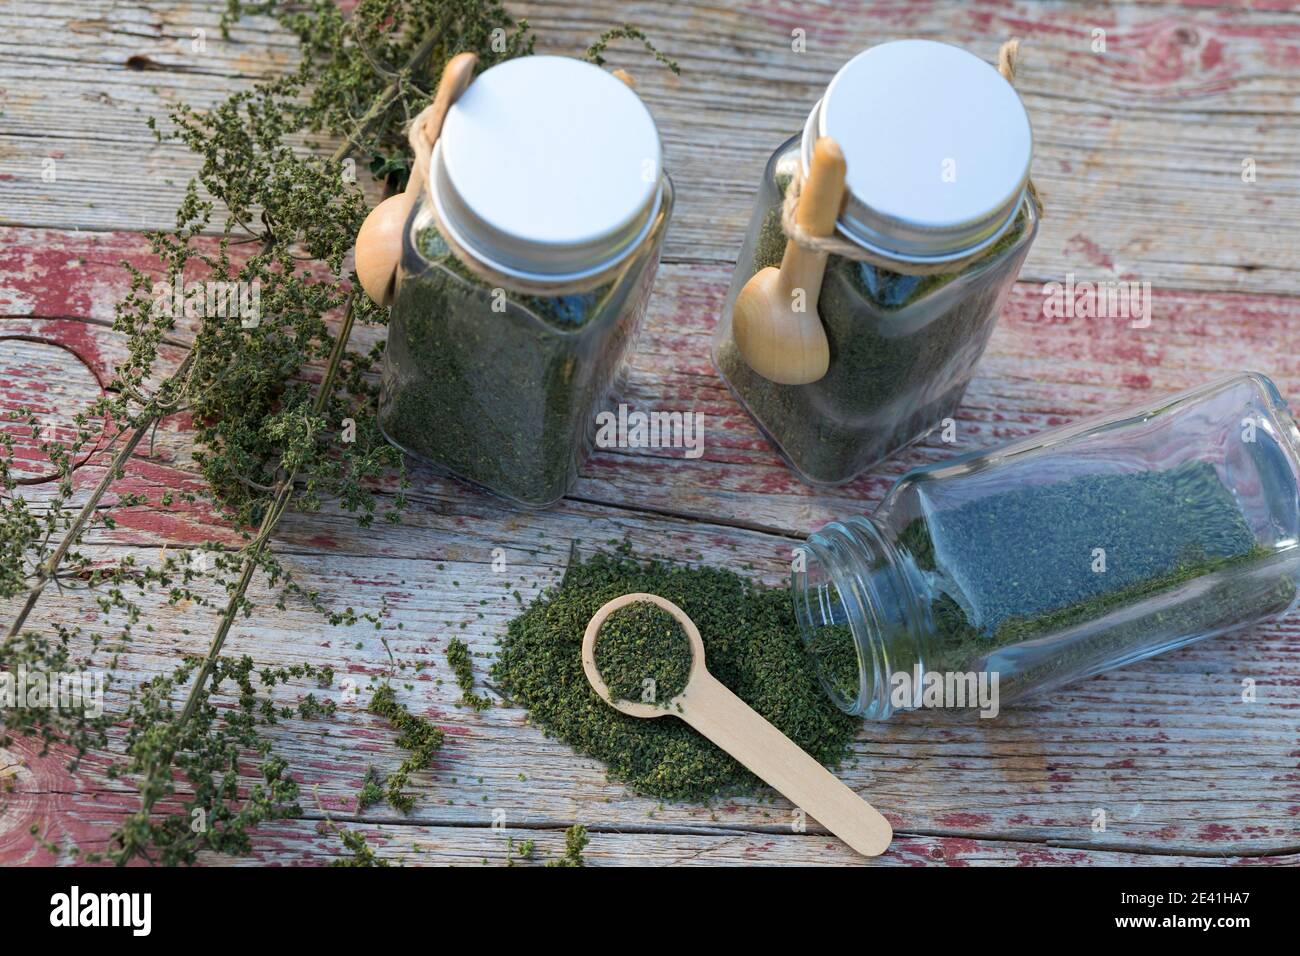 stinging nettle (Urtica dioica), dried nettle seeds in glass containers with wooden spoons, Germany Stock Photo